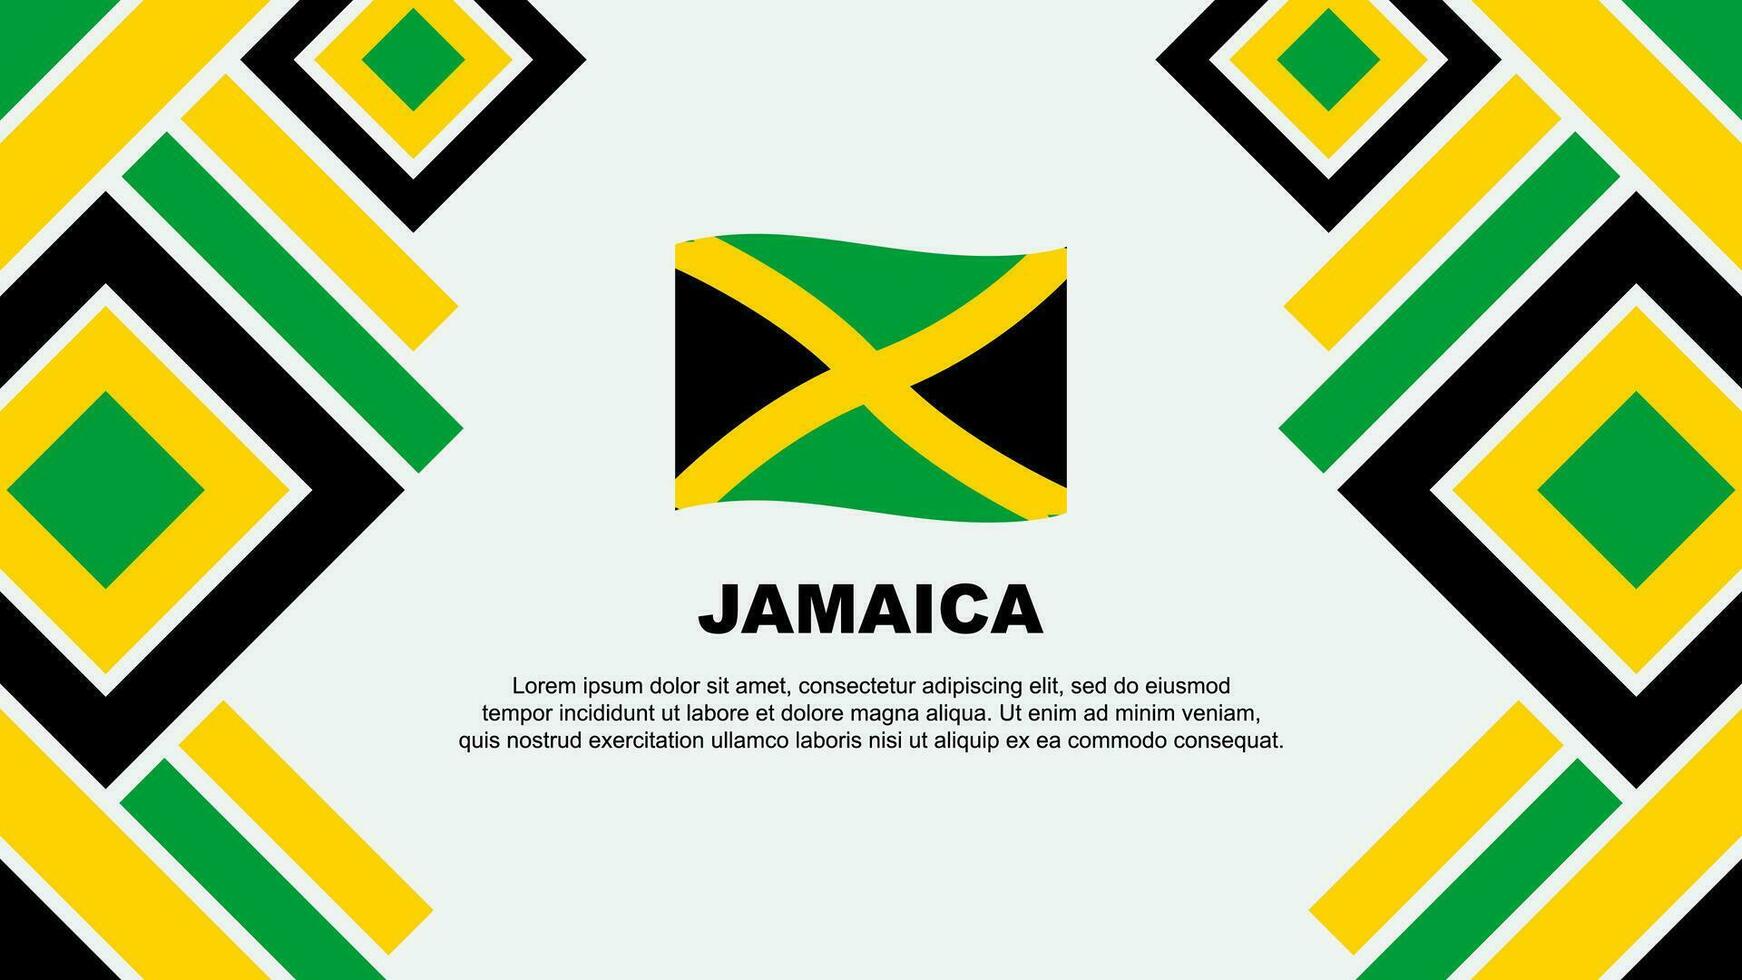 Jamaica Flag Abstract Background Design Template. Jamaica Independence Day Banner Wallpaper Vector Illustration. Jamaica